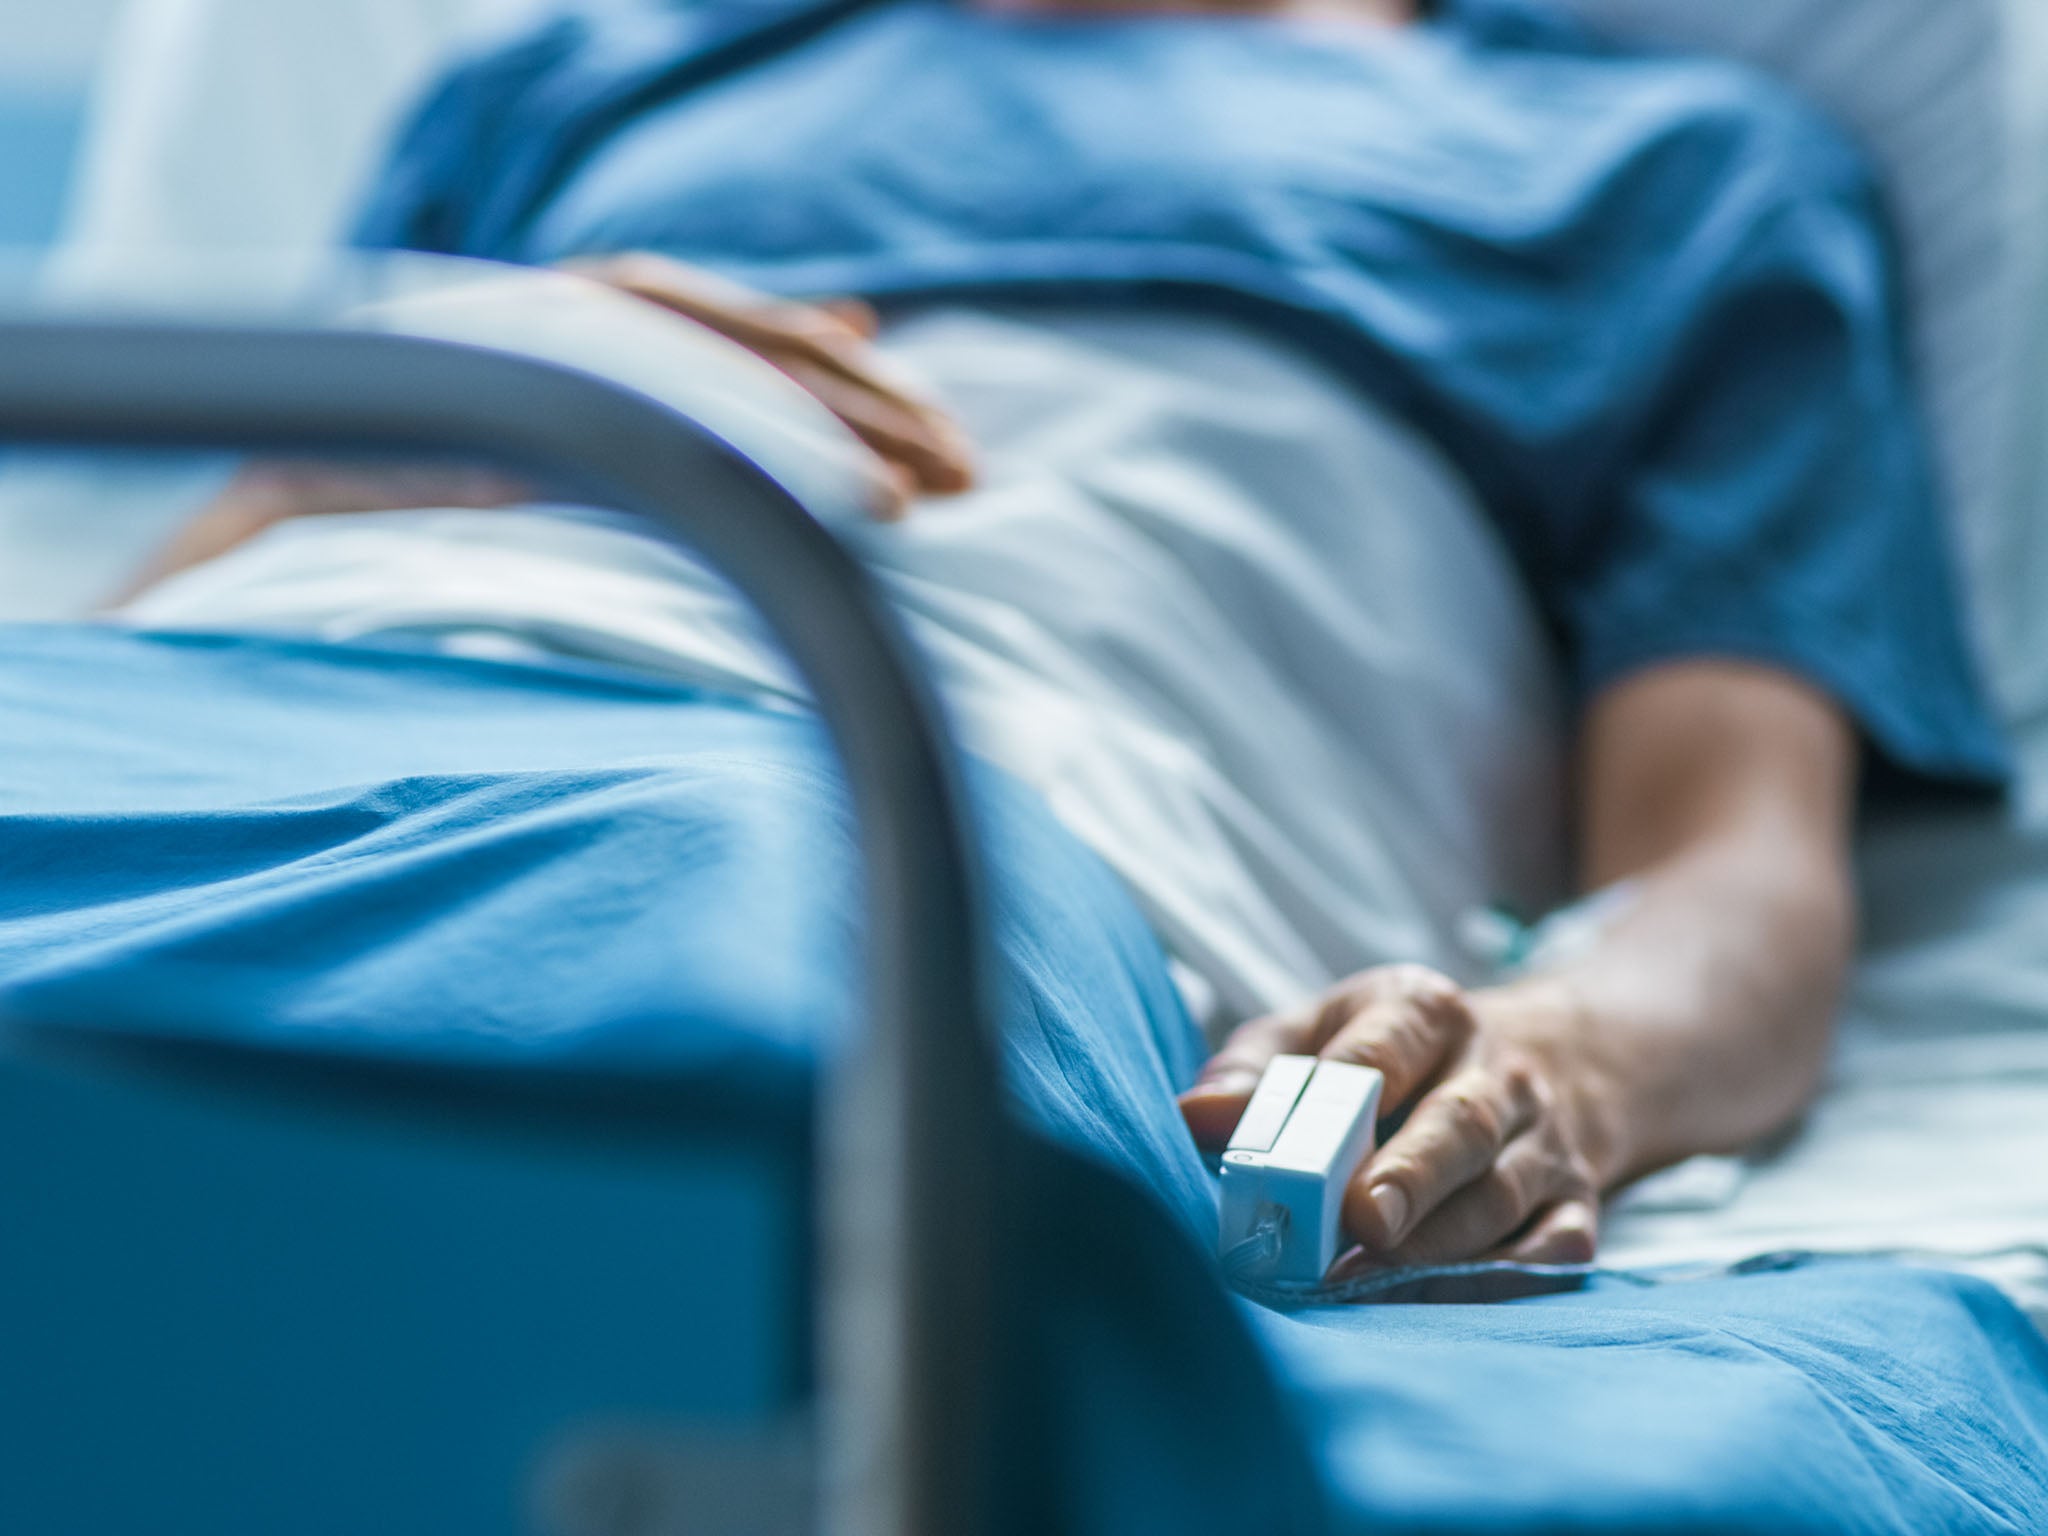 Bacterial resistance threatens patients in ICUs